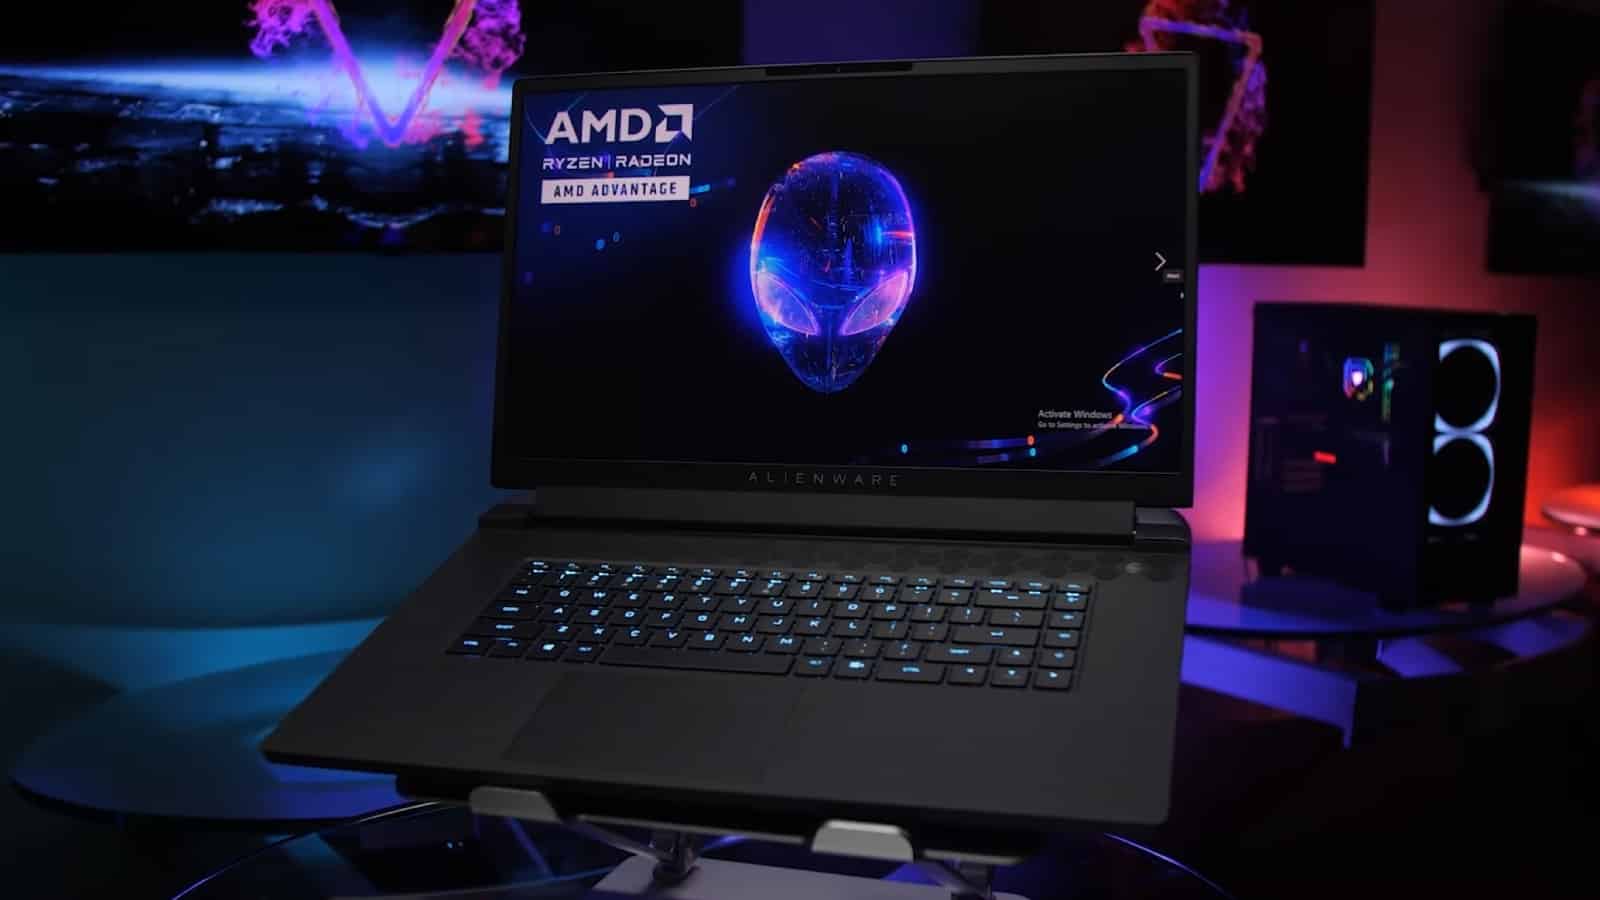 The Alienware M17 R5 gaming laptop